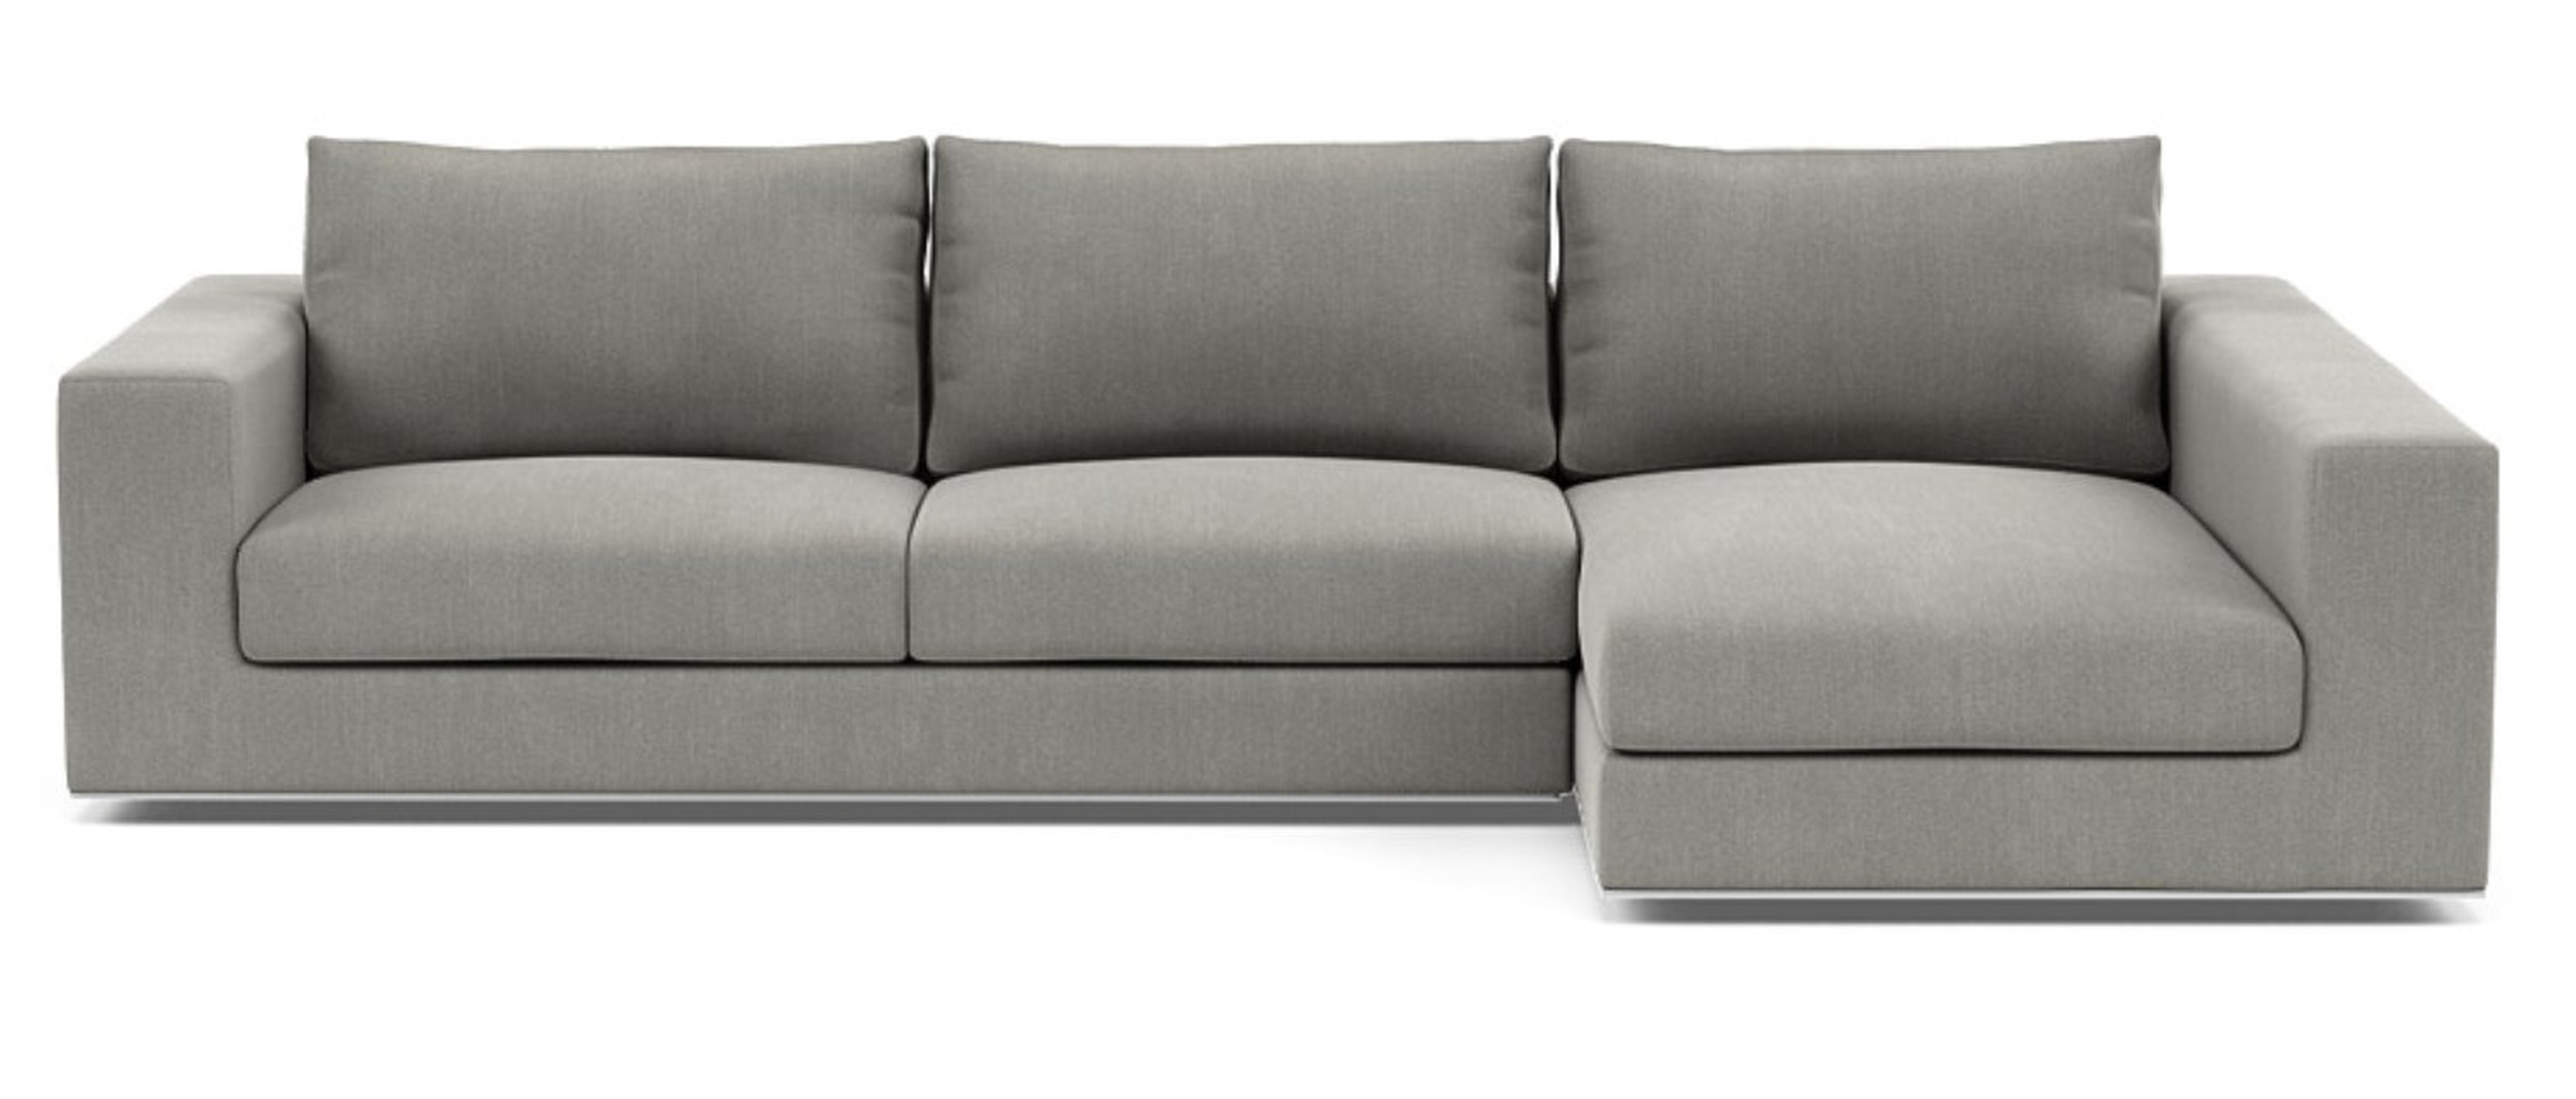 WALTERS Sectional Sofa with Right Chaise, Mortar Performance Micro Knit, 115'' Long, 2 Cushions Included, Standard (63”) Chaise Length, Standard down blend Included - Interior Define